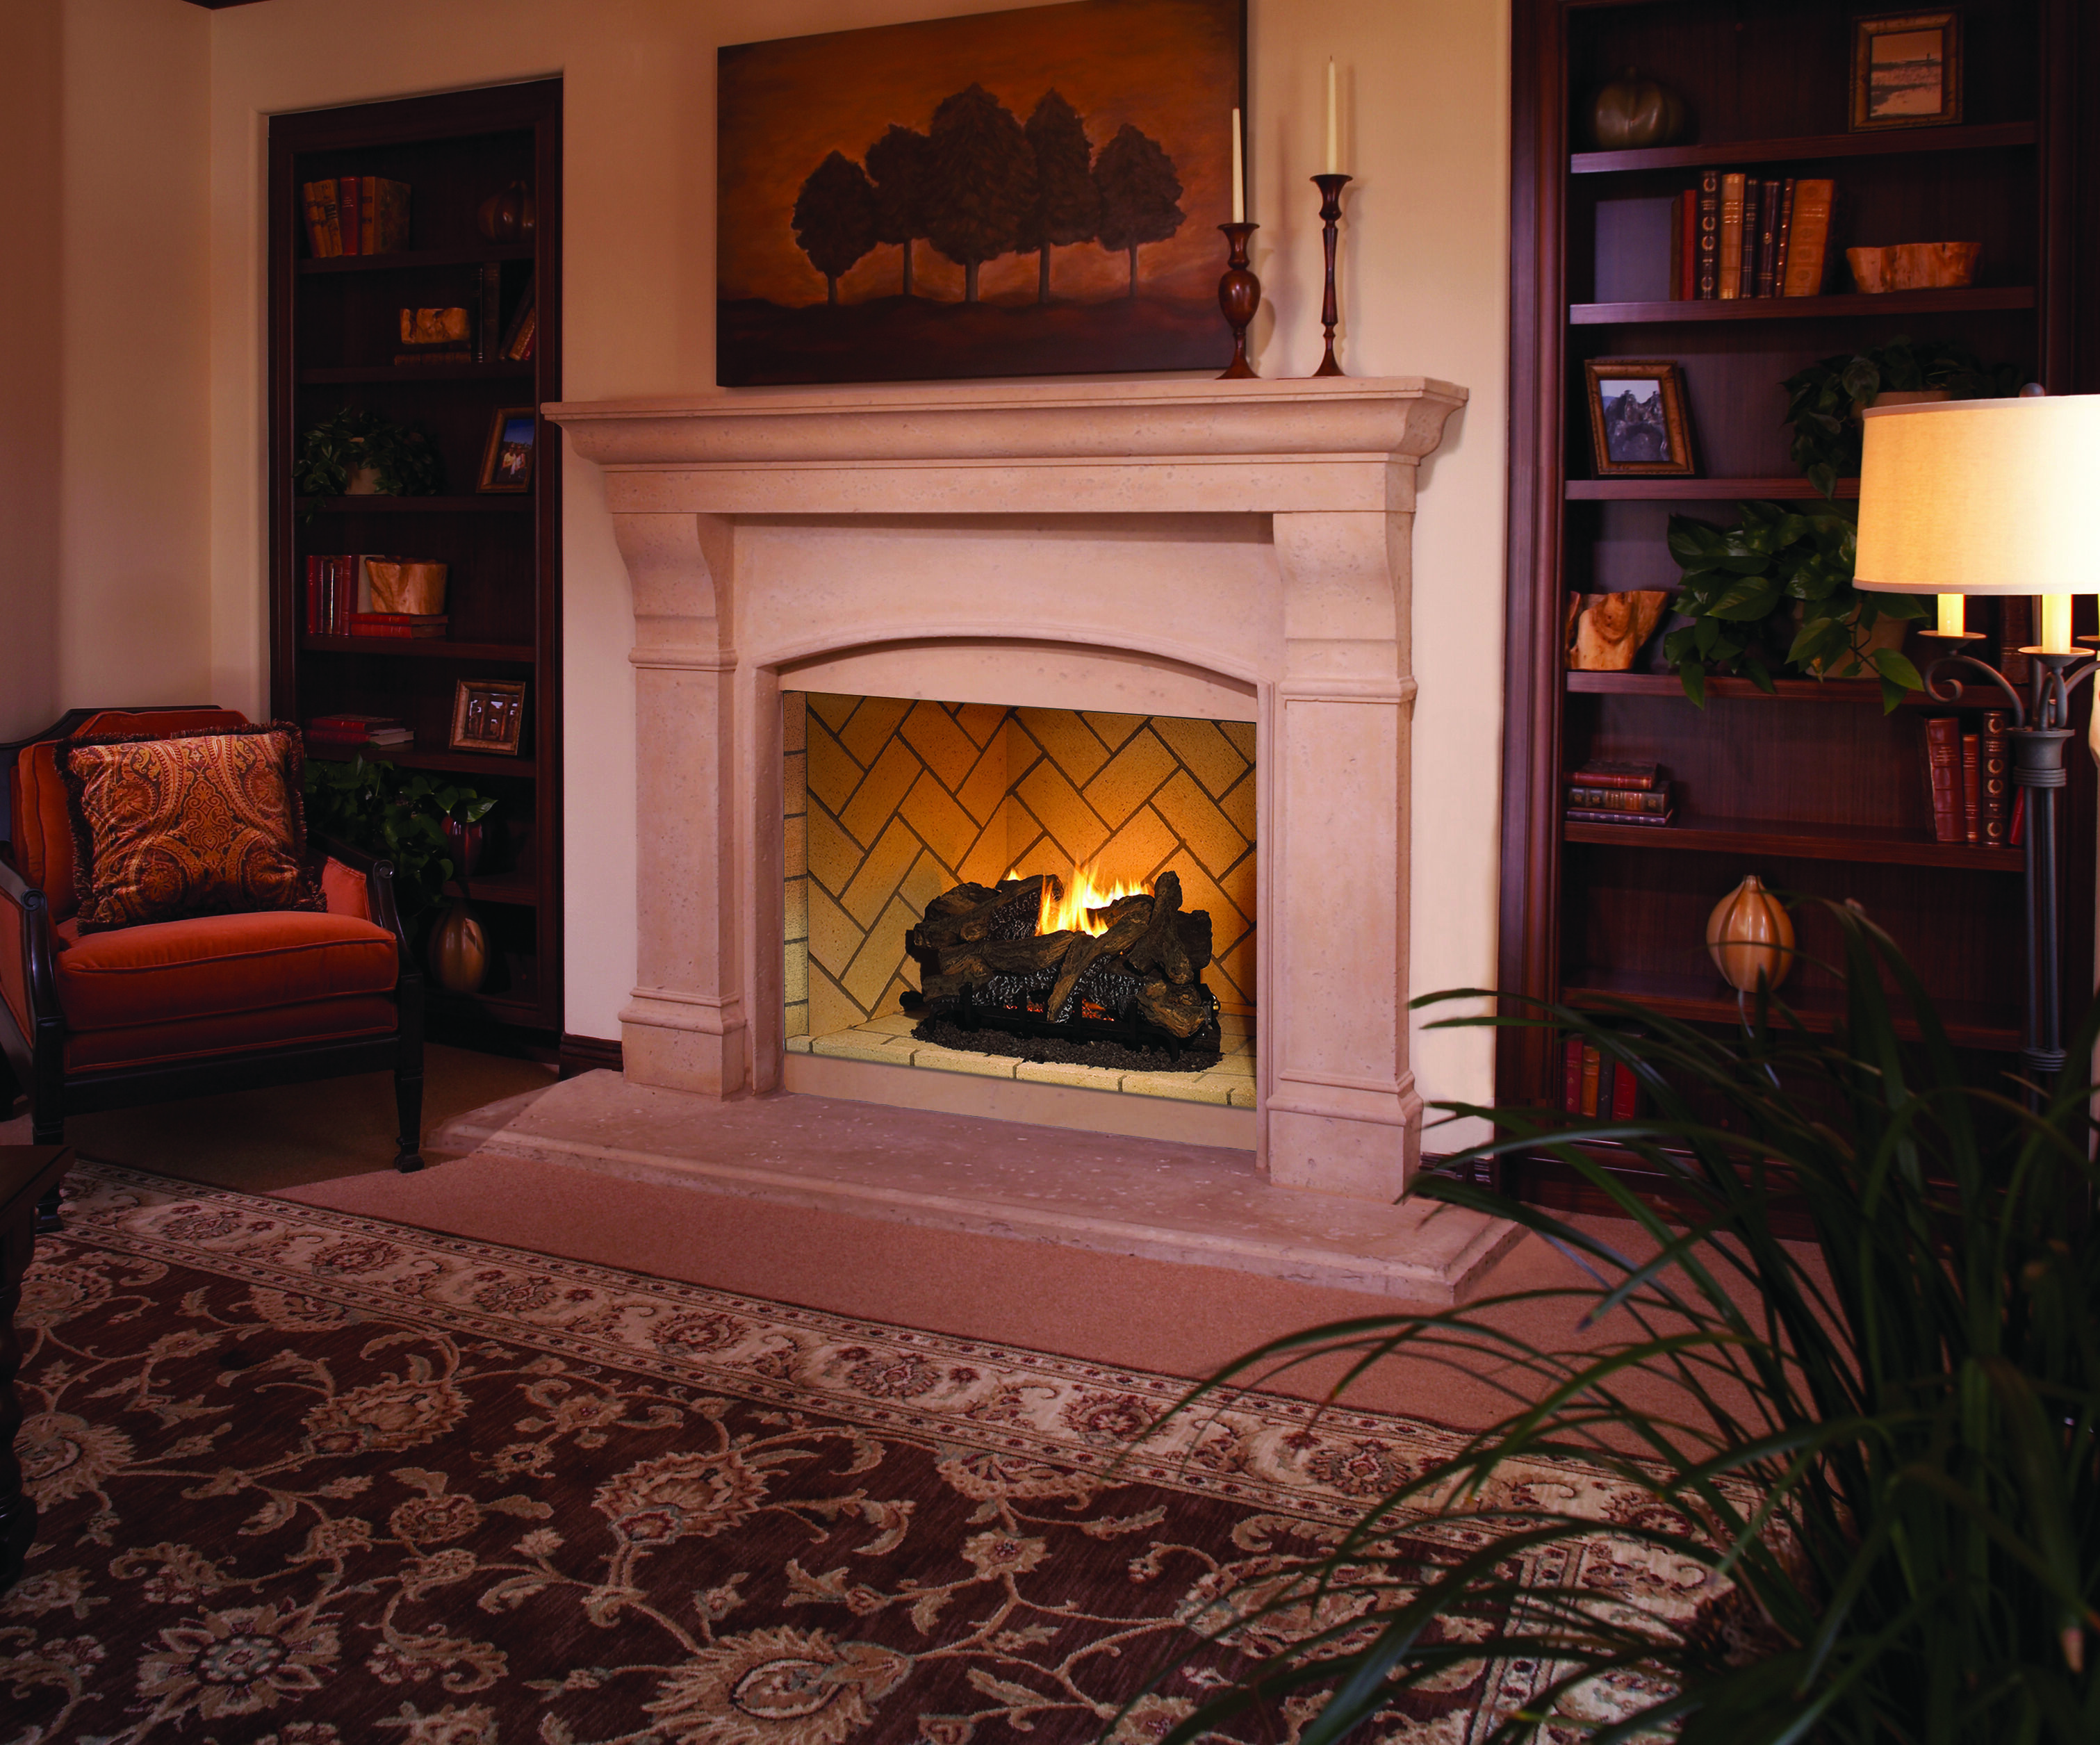 The Superior VRT6000 Ventless Firebox is 30 inches tall and features a beautiful mosaic masonry brick liner